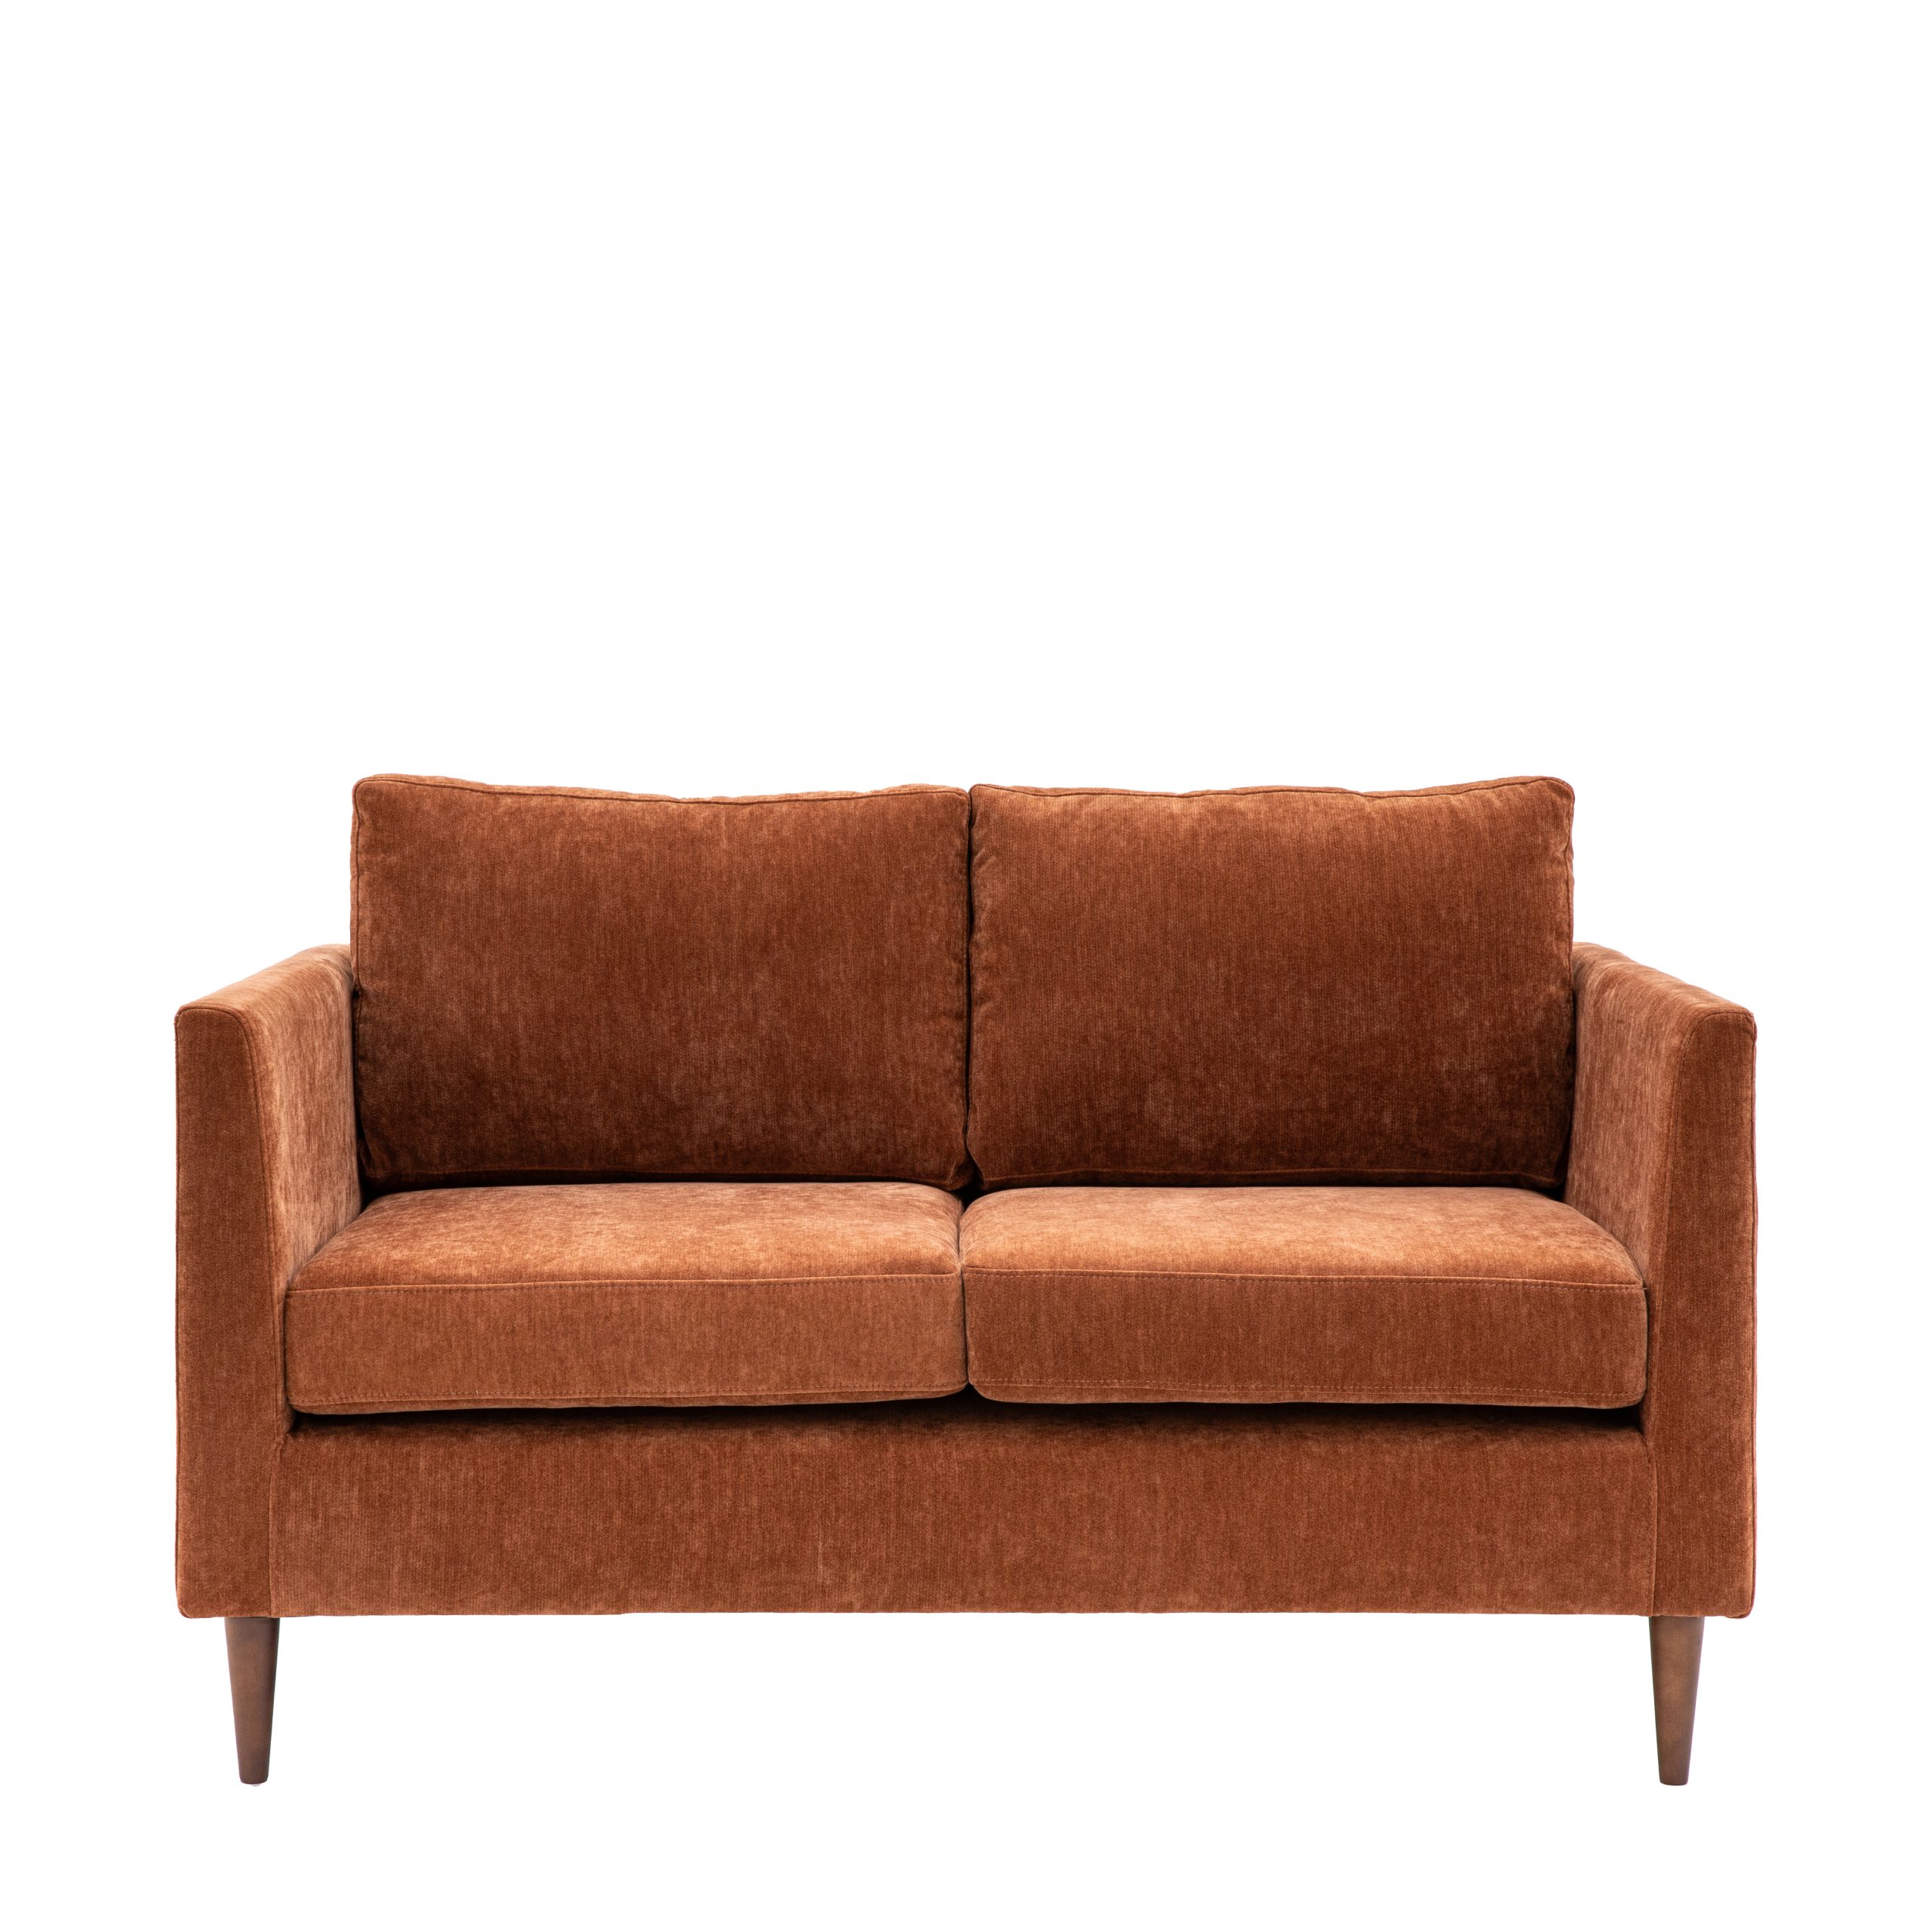 Gallery Direct Gateford Sofa 2 Seater Rust